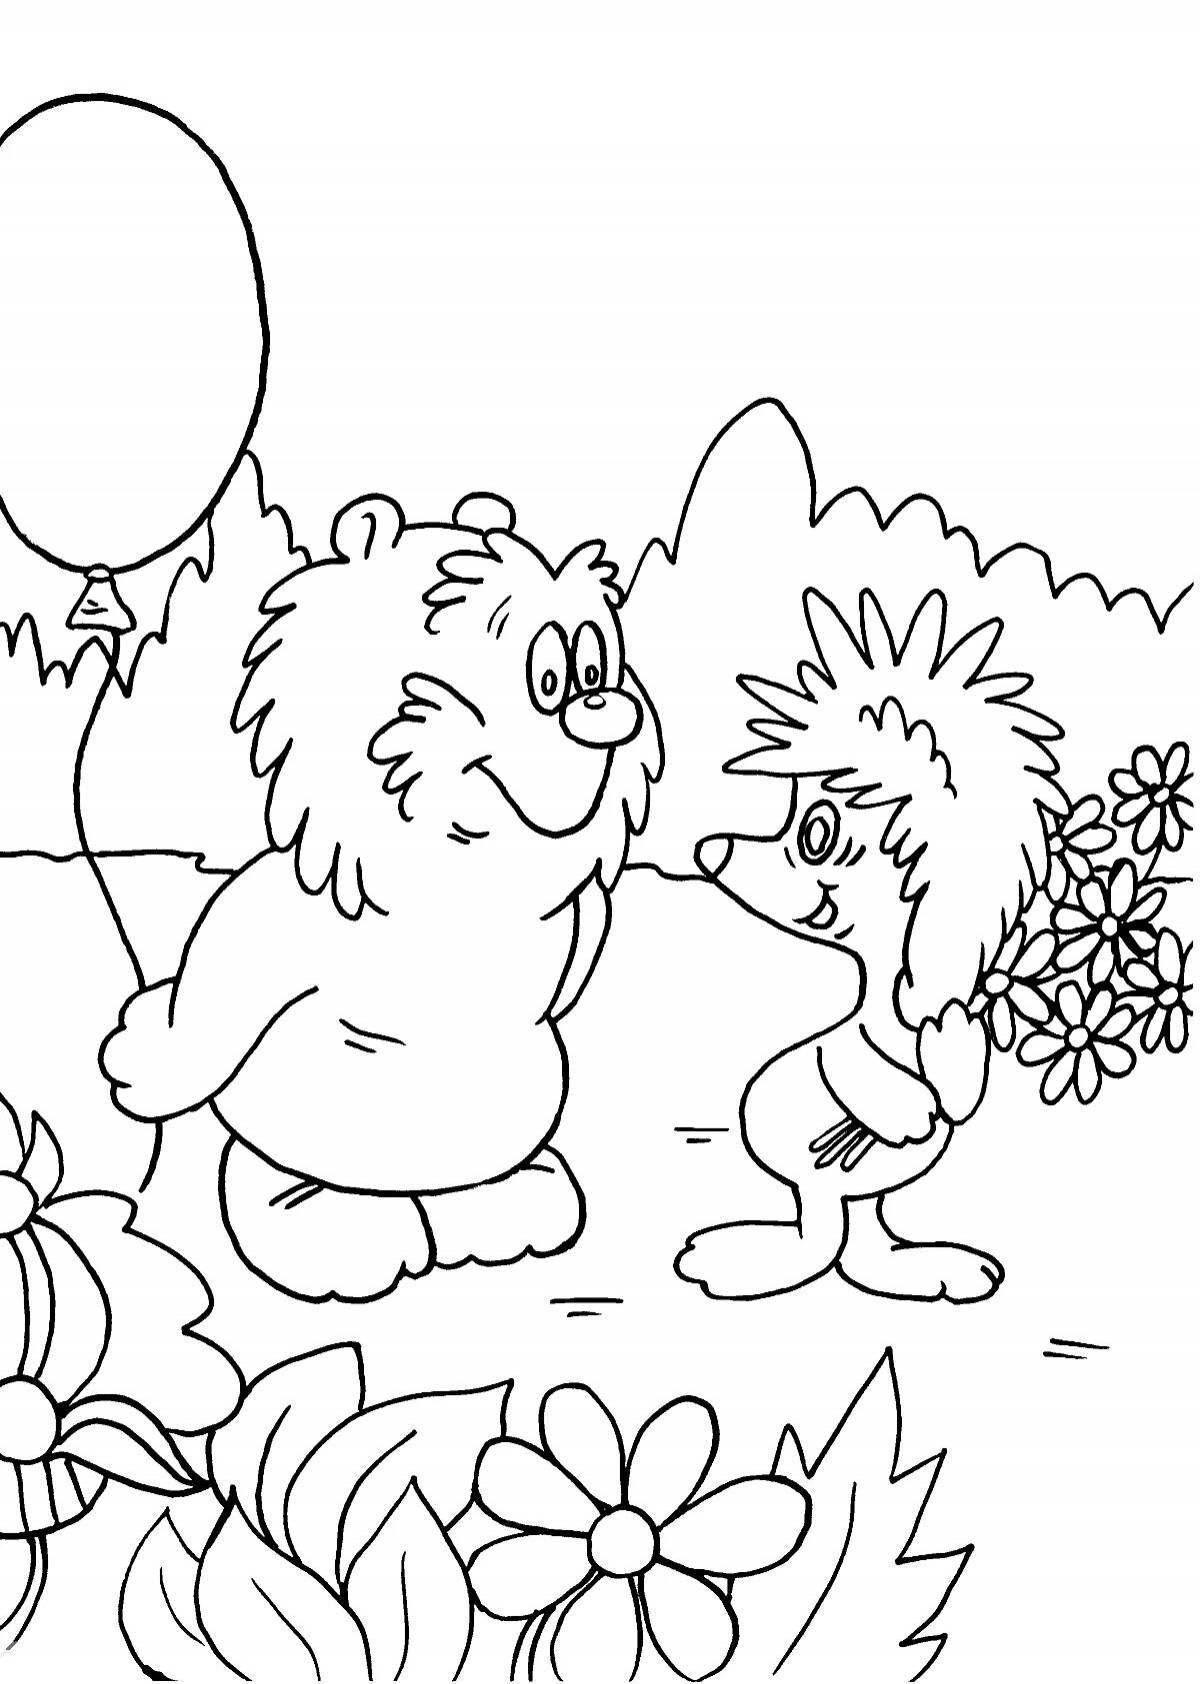 Amazing tryam hello coloring page